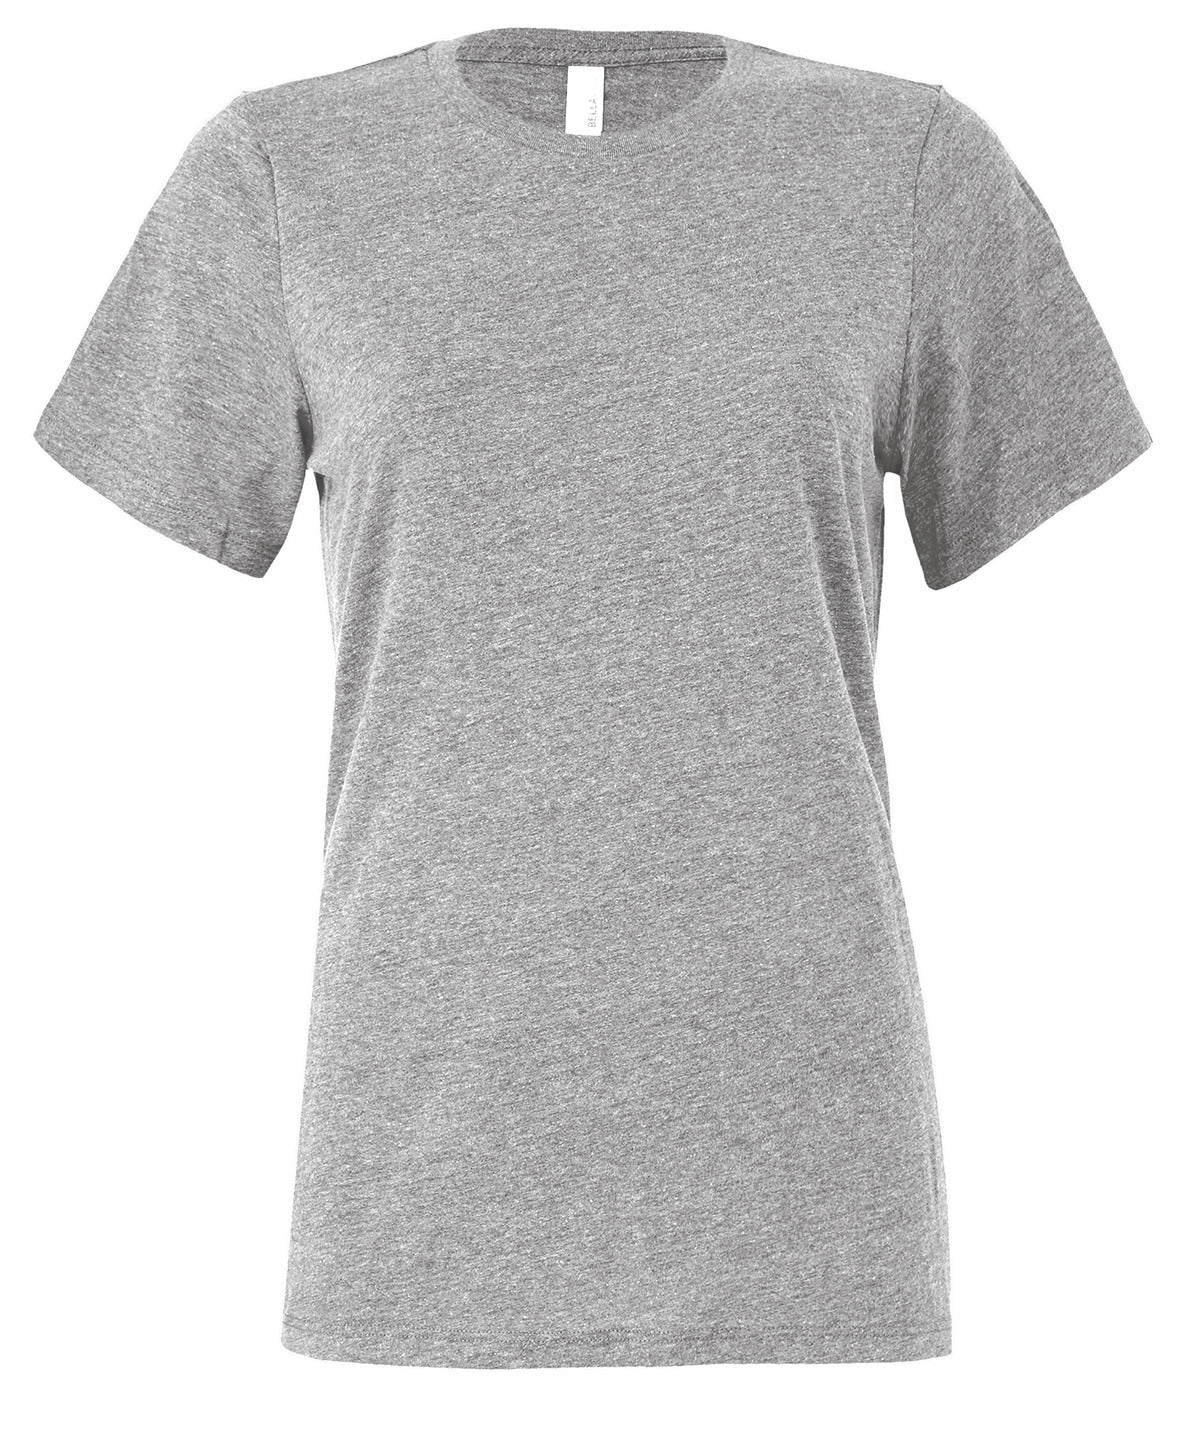 Personalised T-Shirts - Heather Grey Bella Canvas Women's relaxed Jersey short sleeve tee